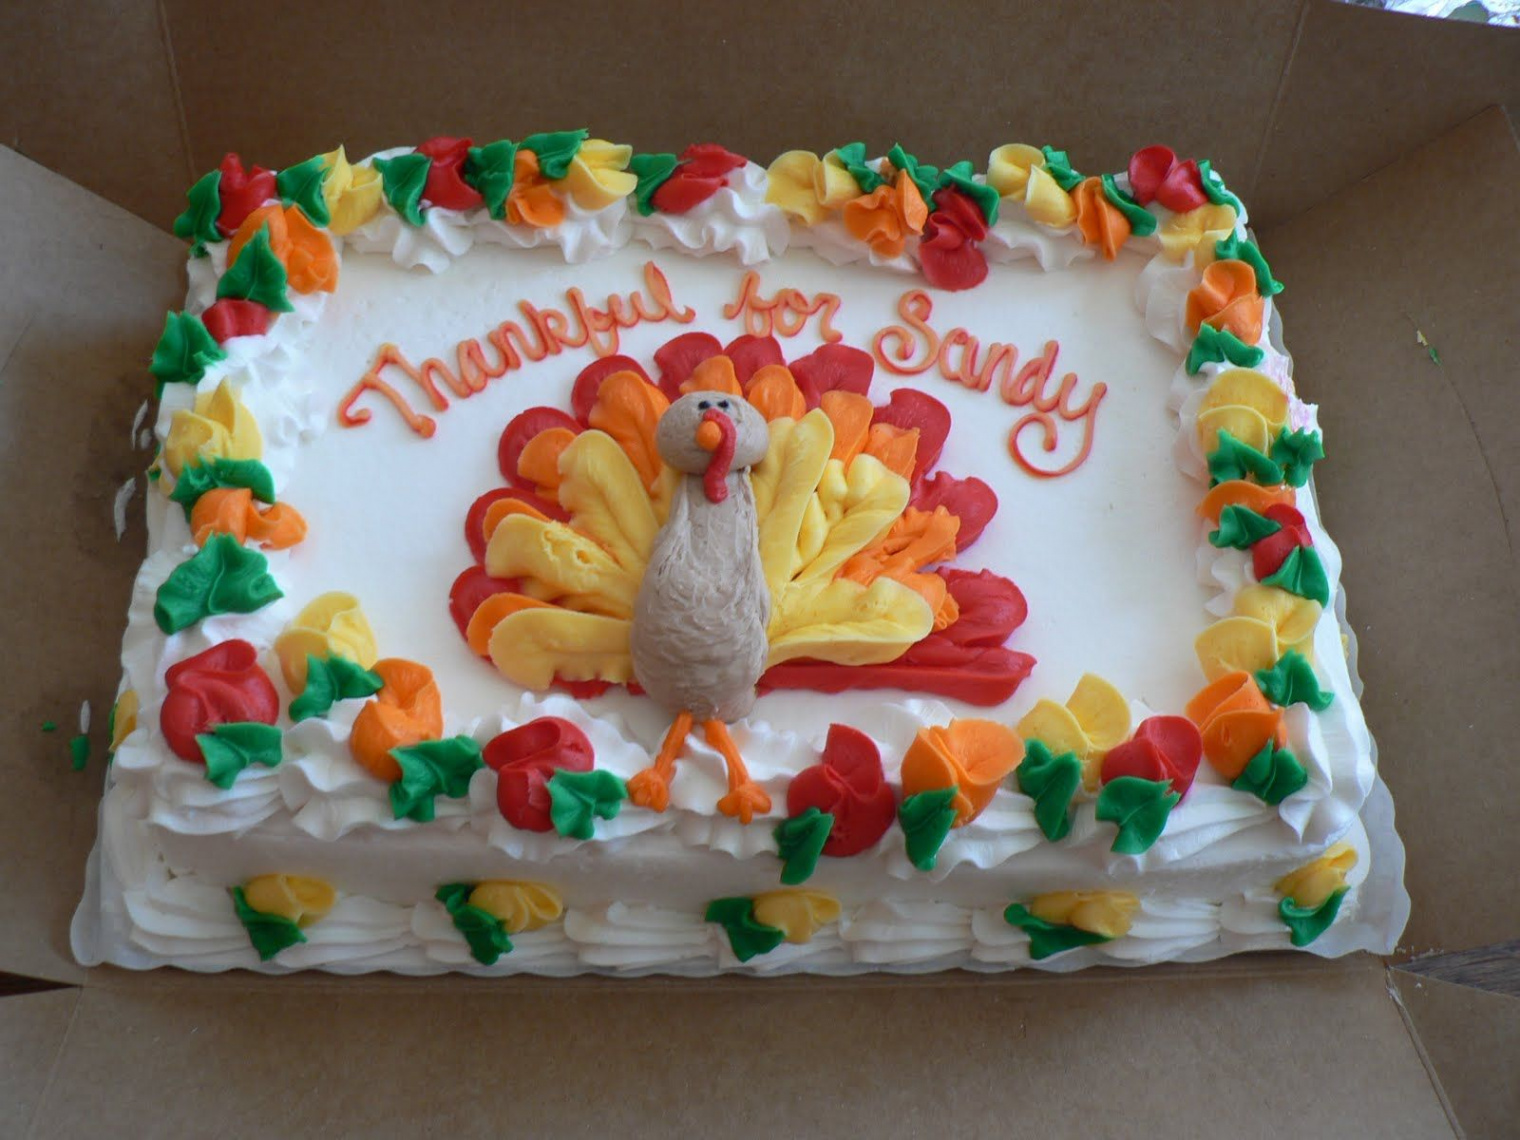 thanksgiving cakes - Google Search  Fall cakes, Fall cakes